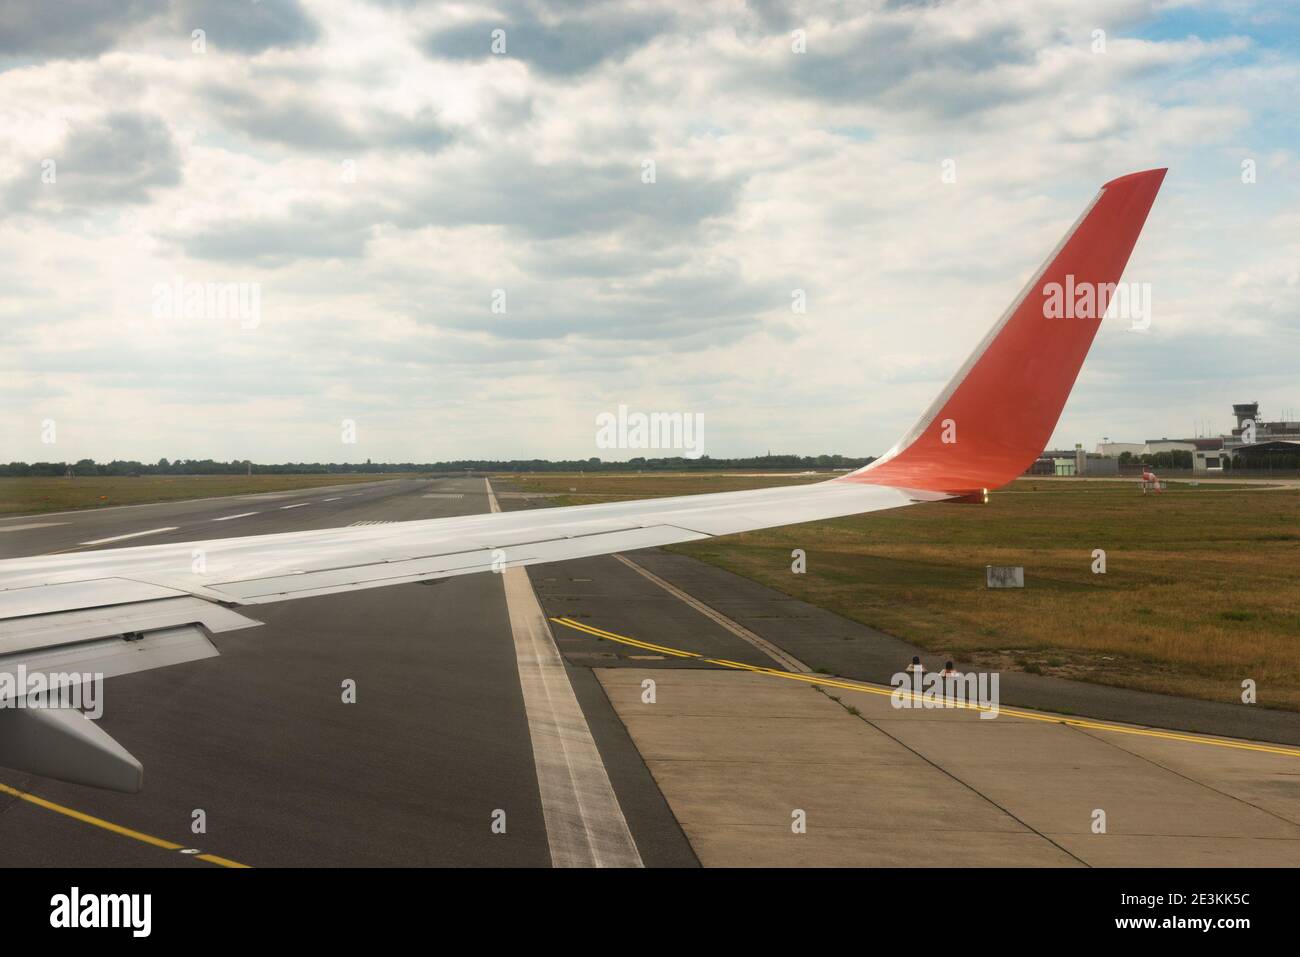 Aircraft heading to the runway take off possition. Airplane wing and take-off runway window view from the jet airliner passenger cabin. Travel concept Stock Photo